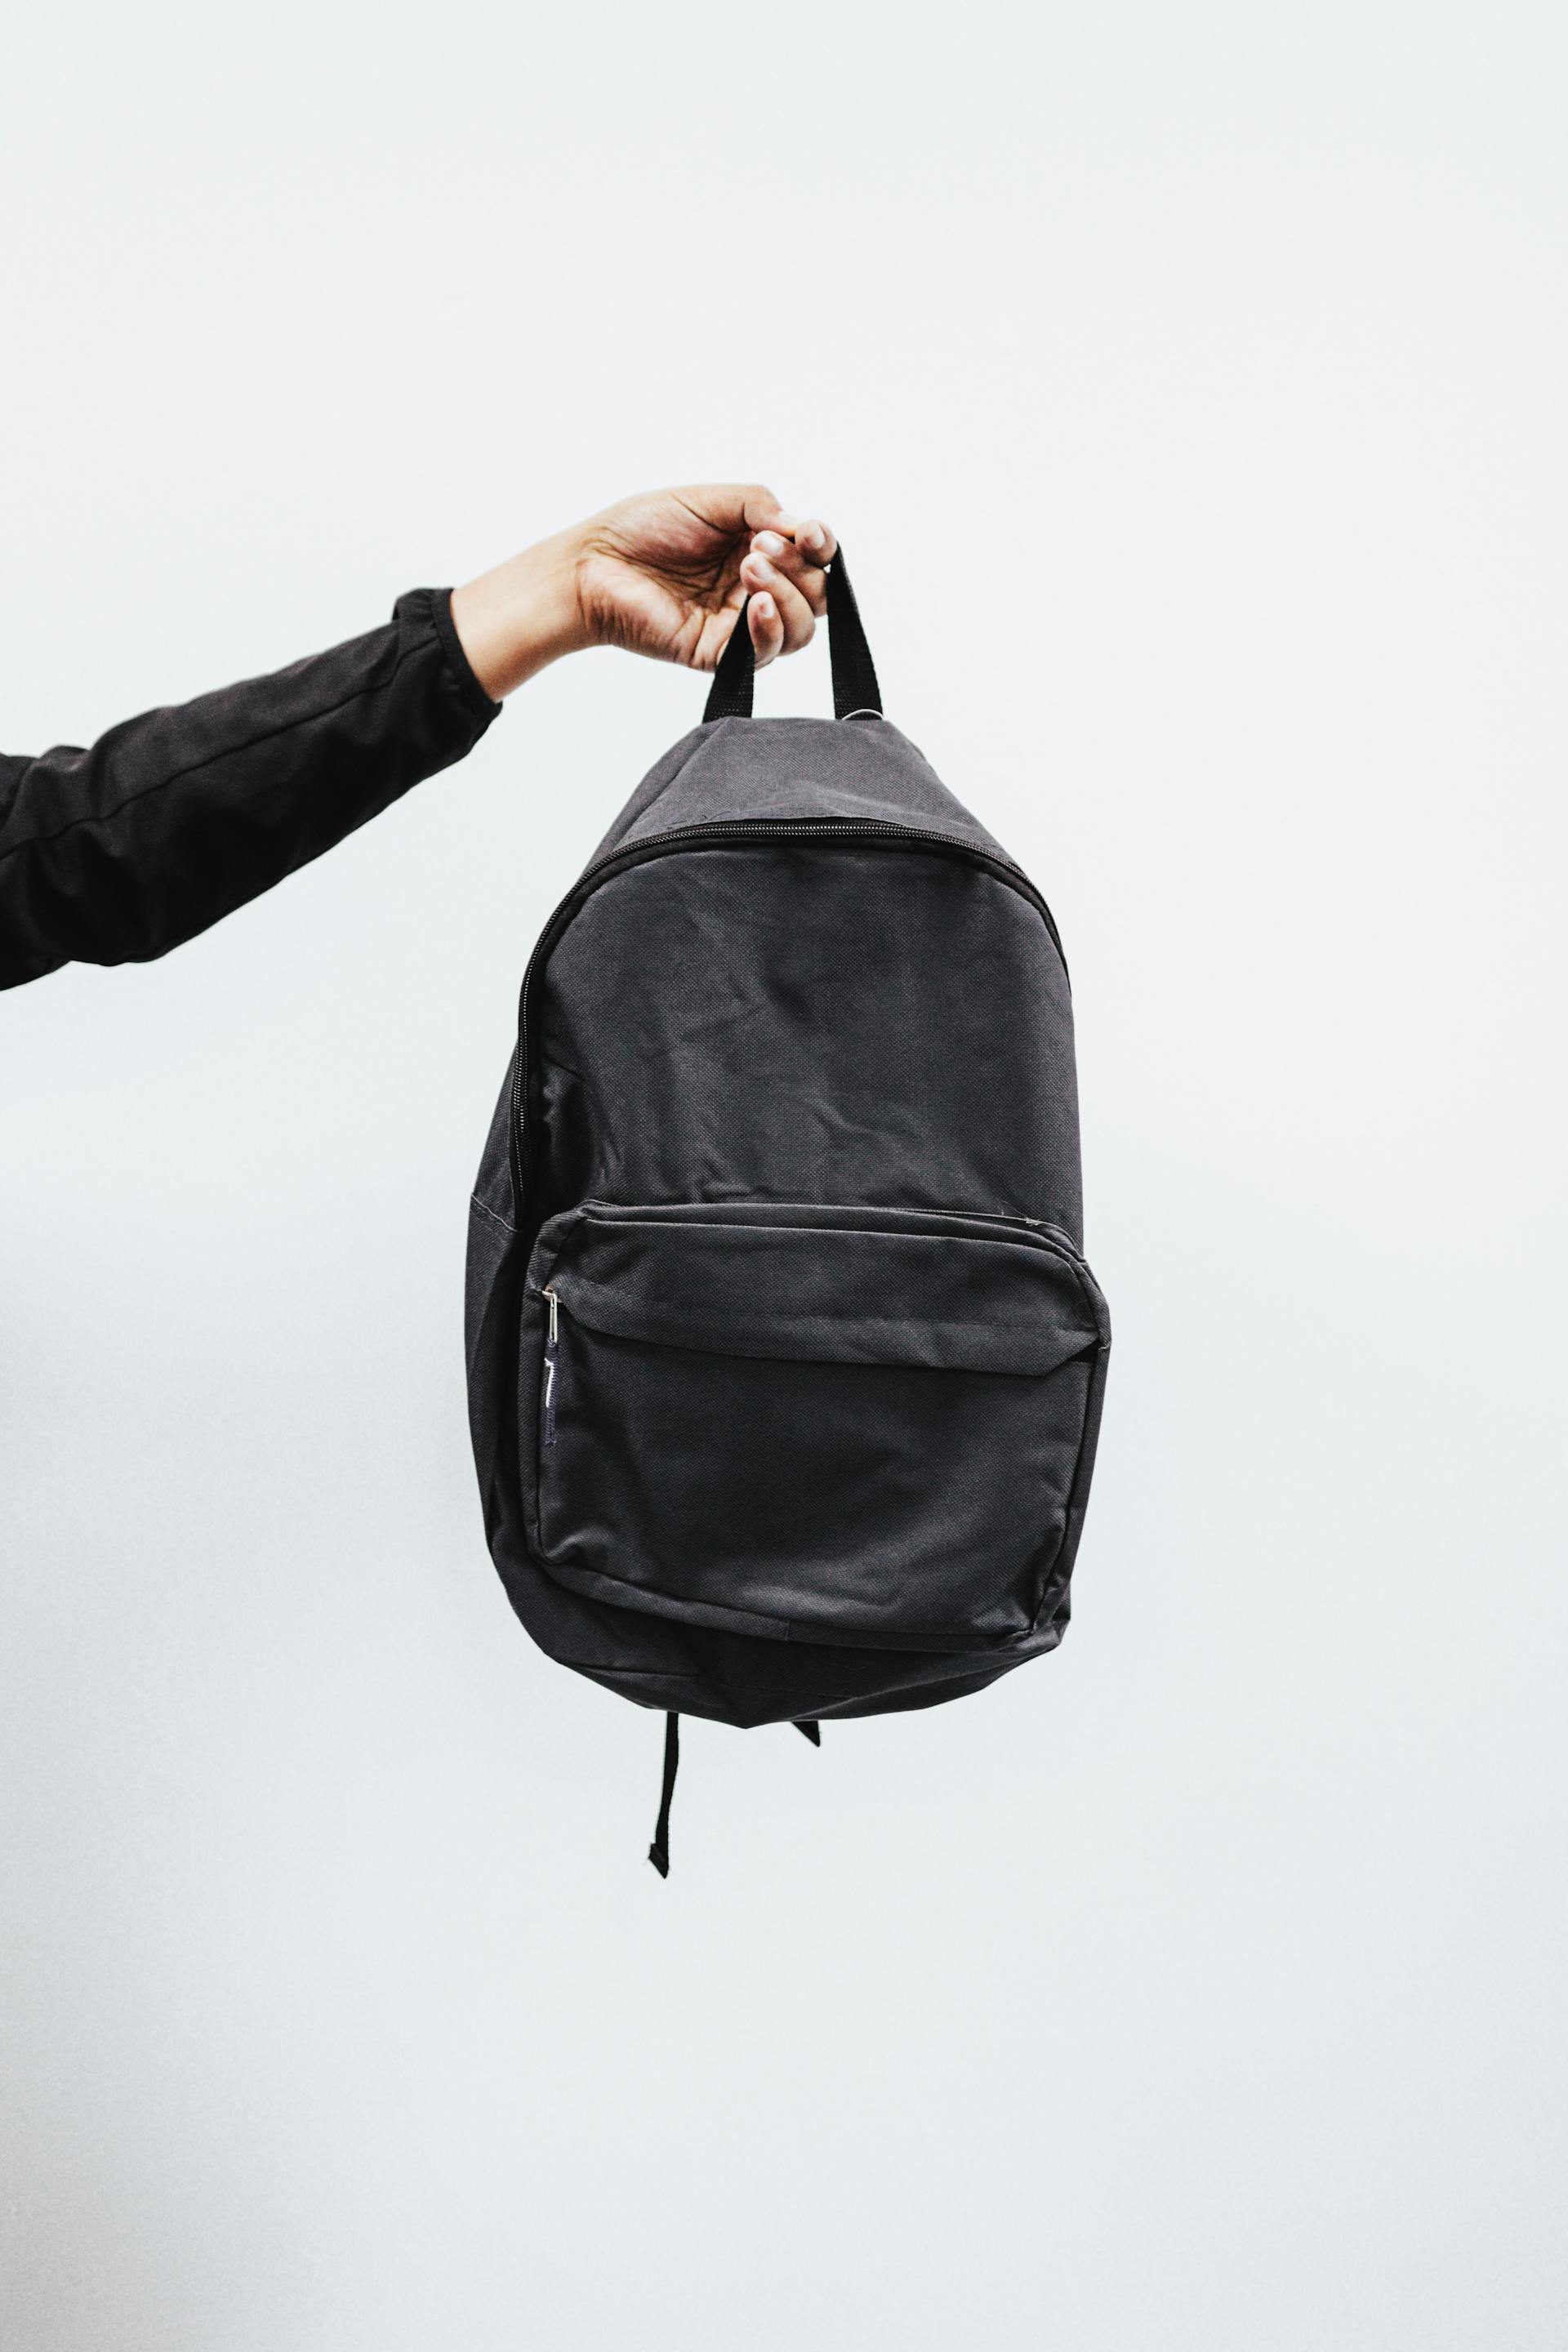 A person holding a black backpack | Source: Pexels